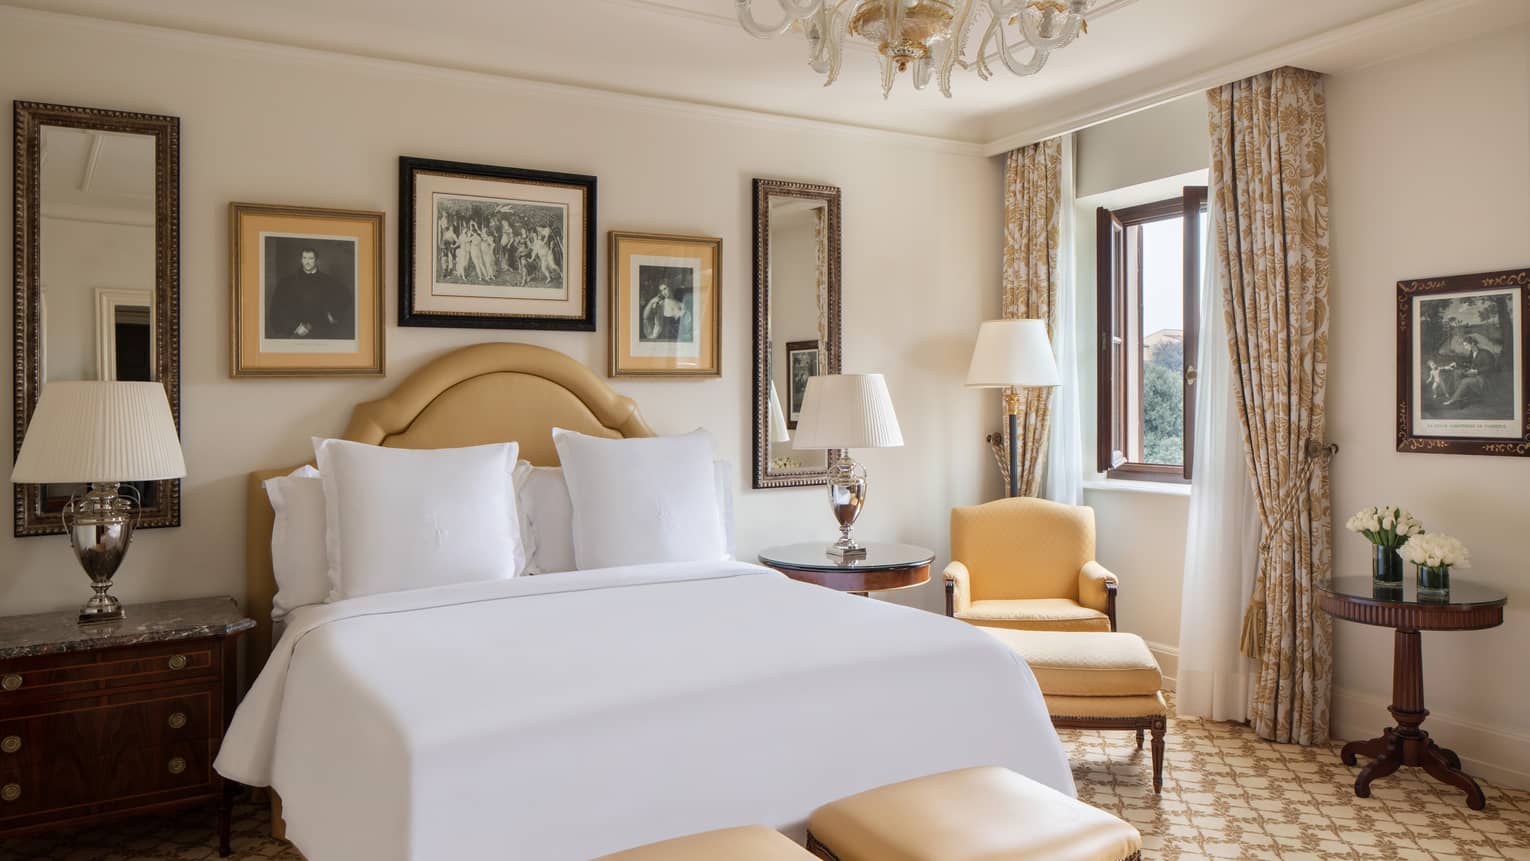 Four Seasons Room at Four Seasons Hotel Firenze, with soft-yellow furniture, framed art, lamps and tree view through window